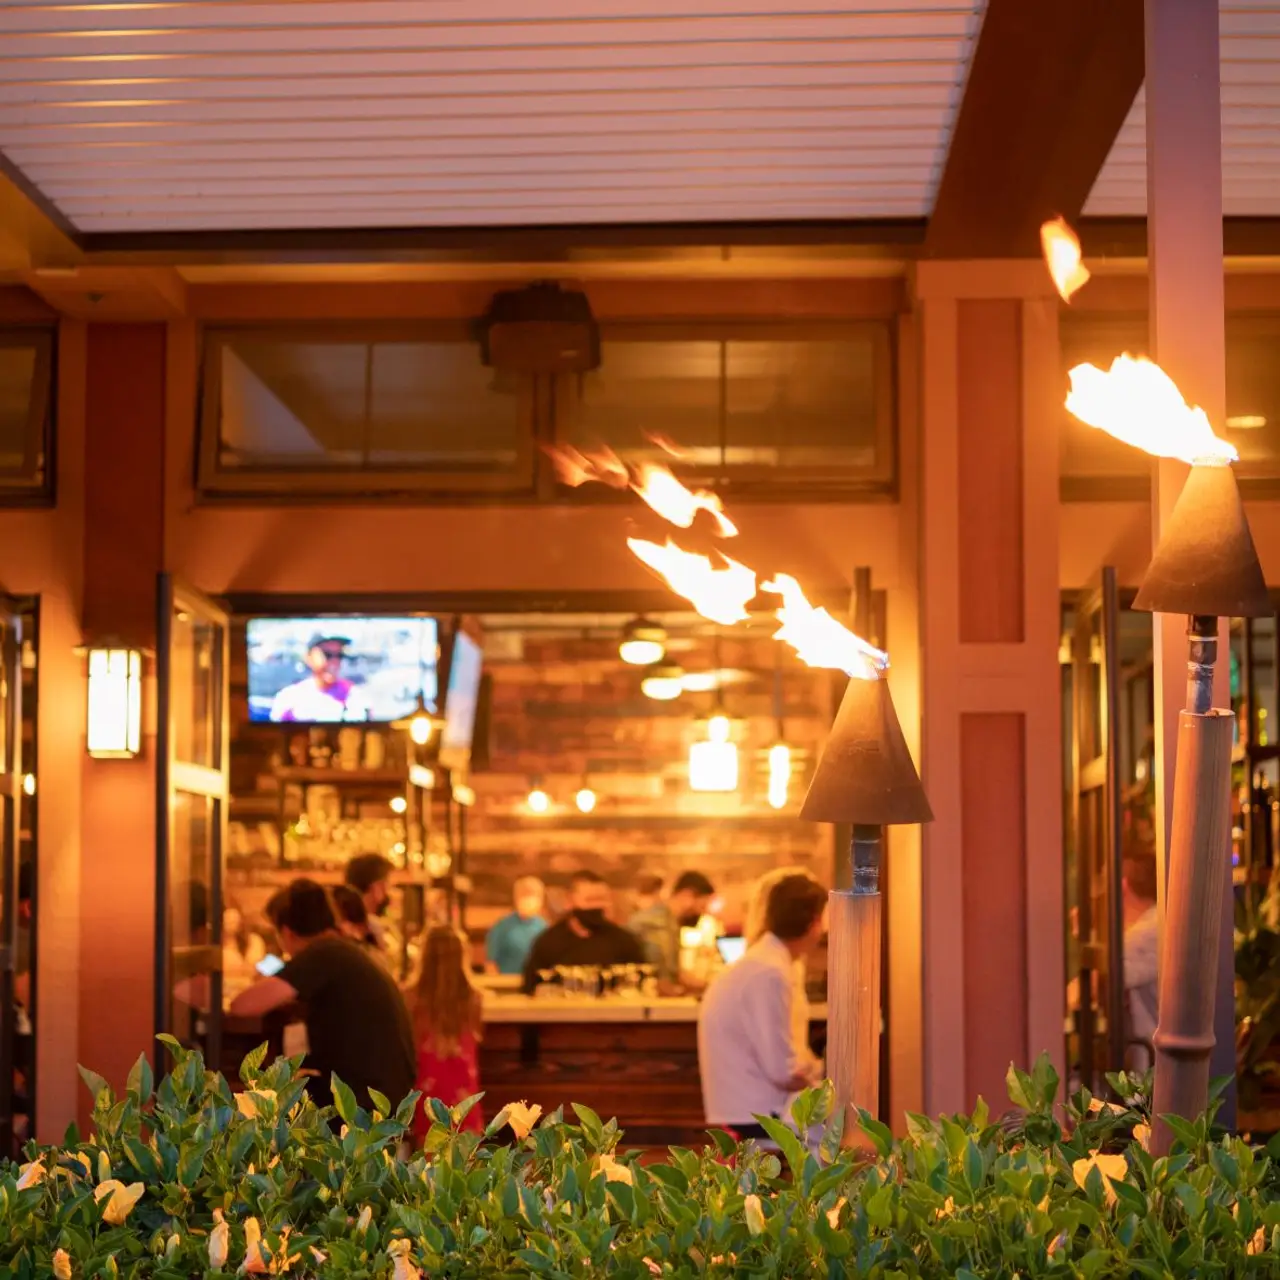 Taverna is a Restaurant located in the city of Kapalua on Maui, Hawaii